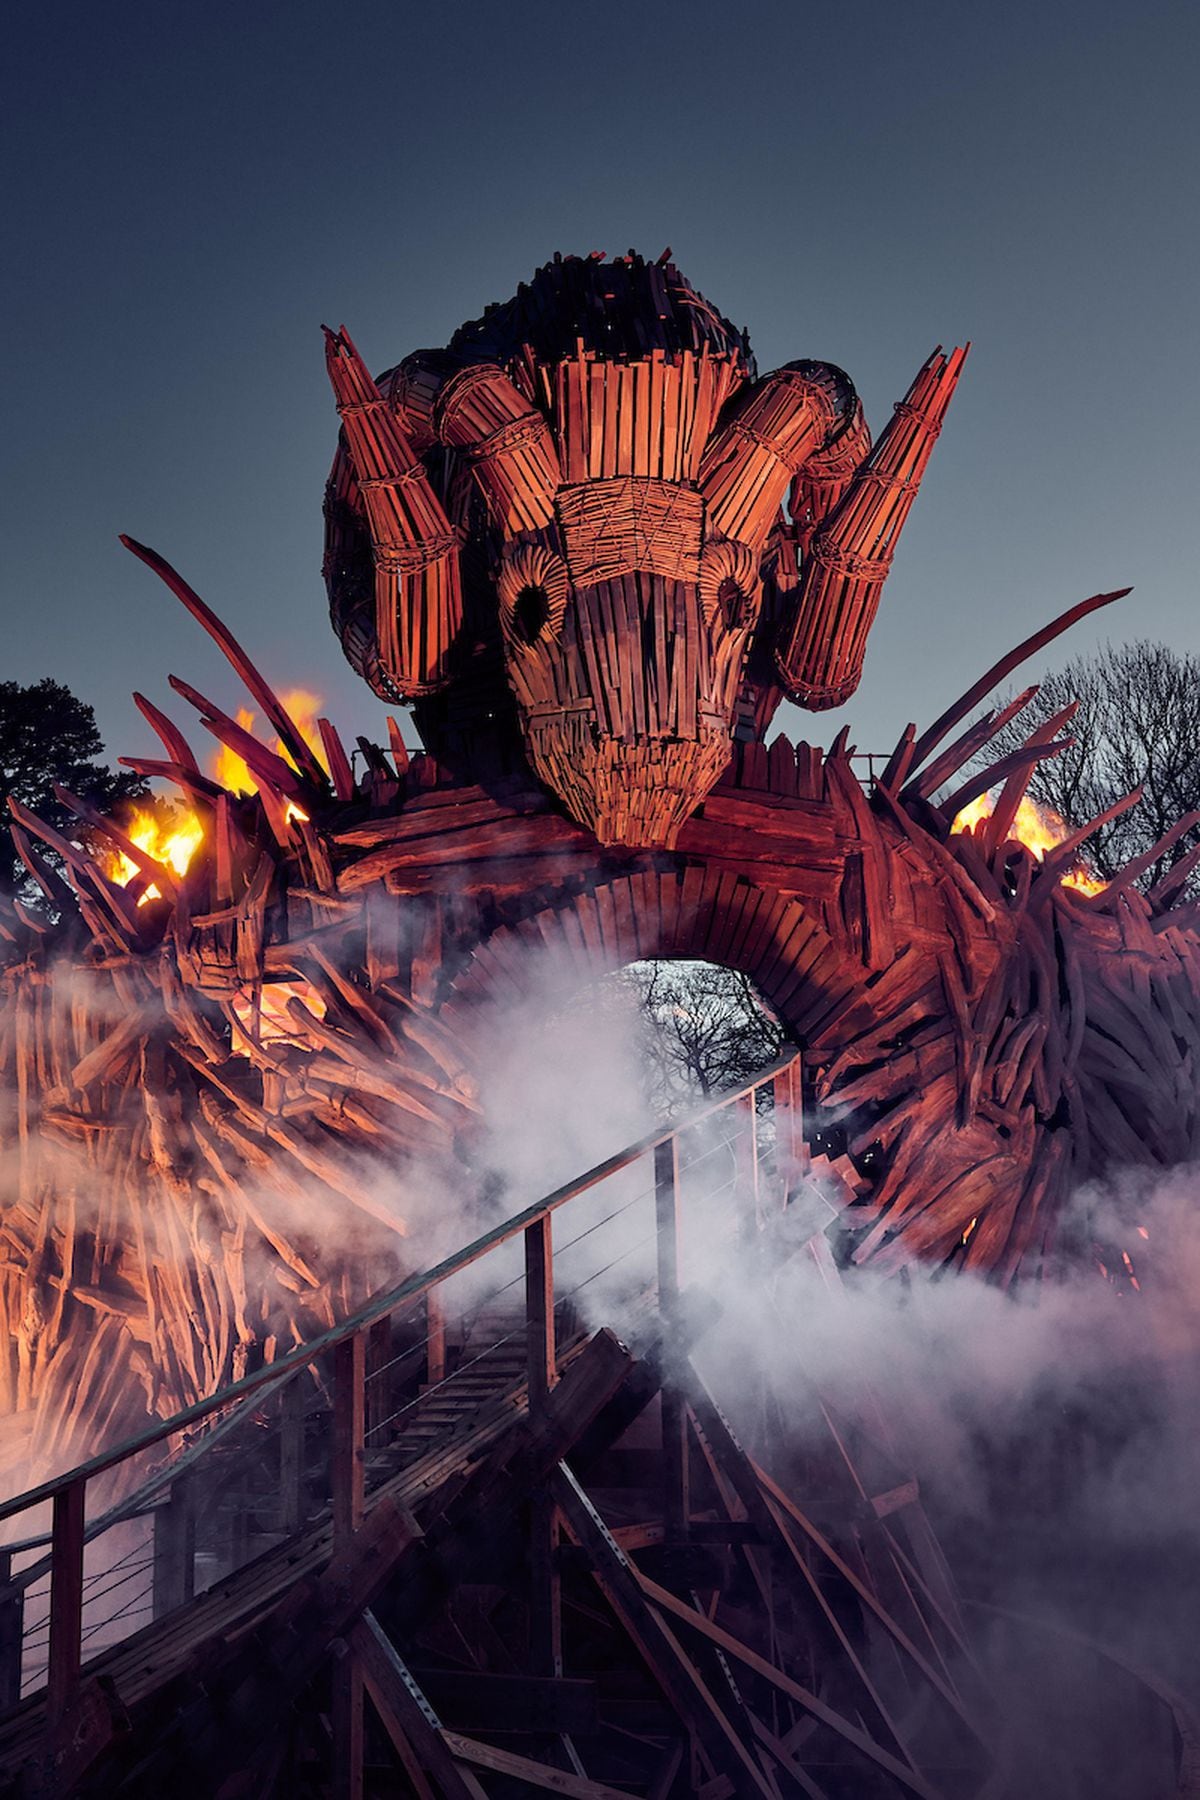 Alton Towers reveals firstlook images of new ride Wicker Man